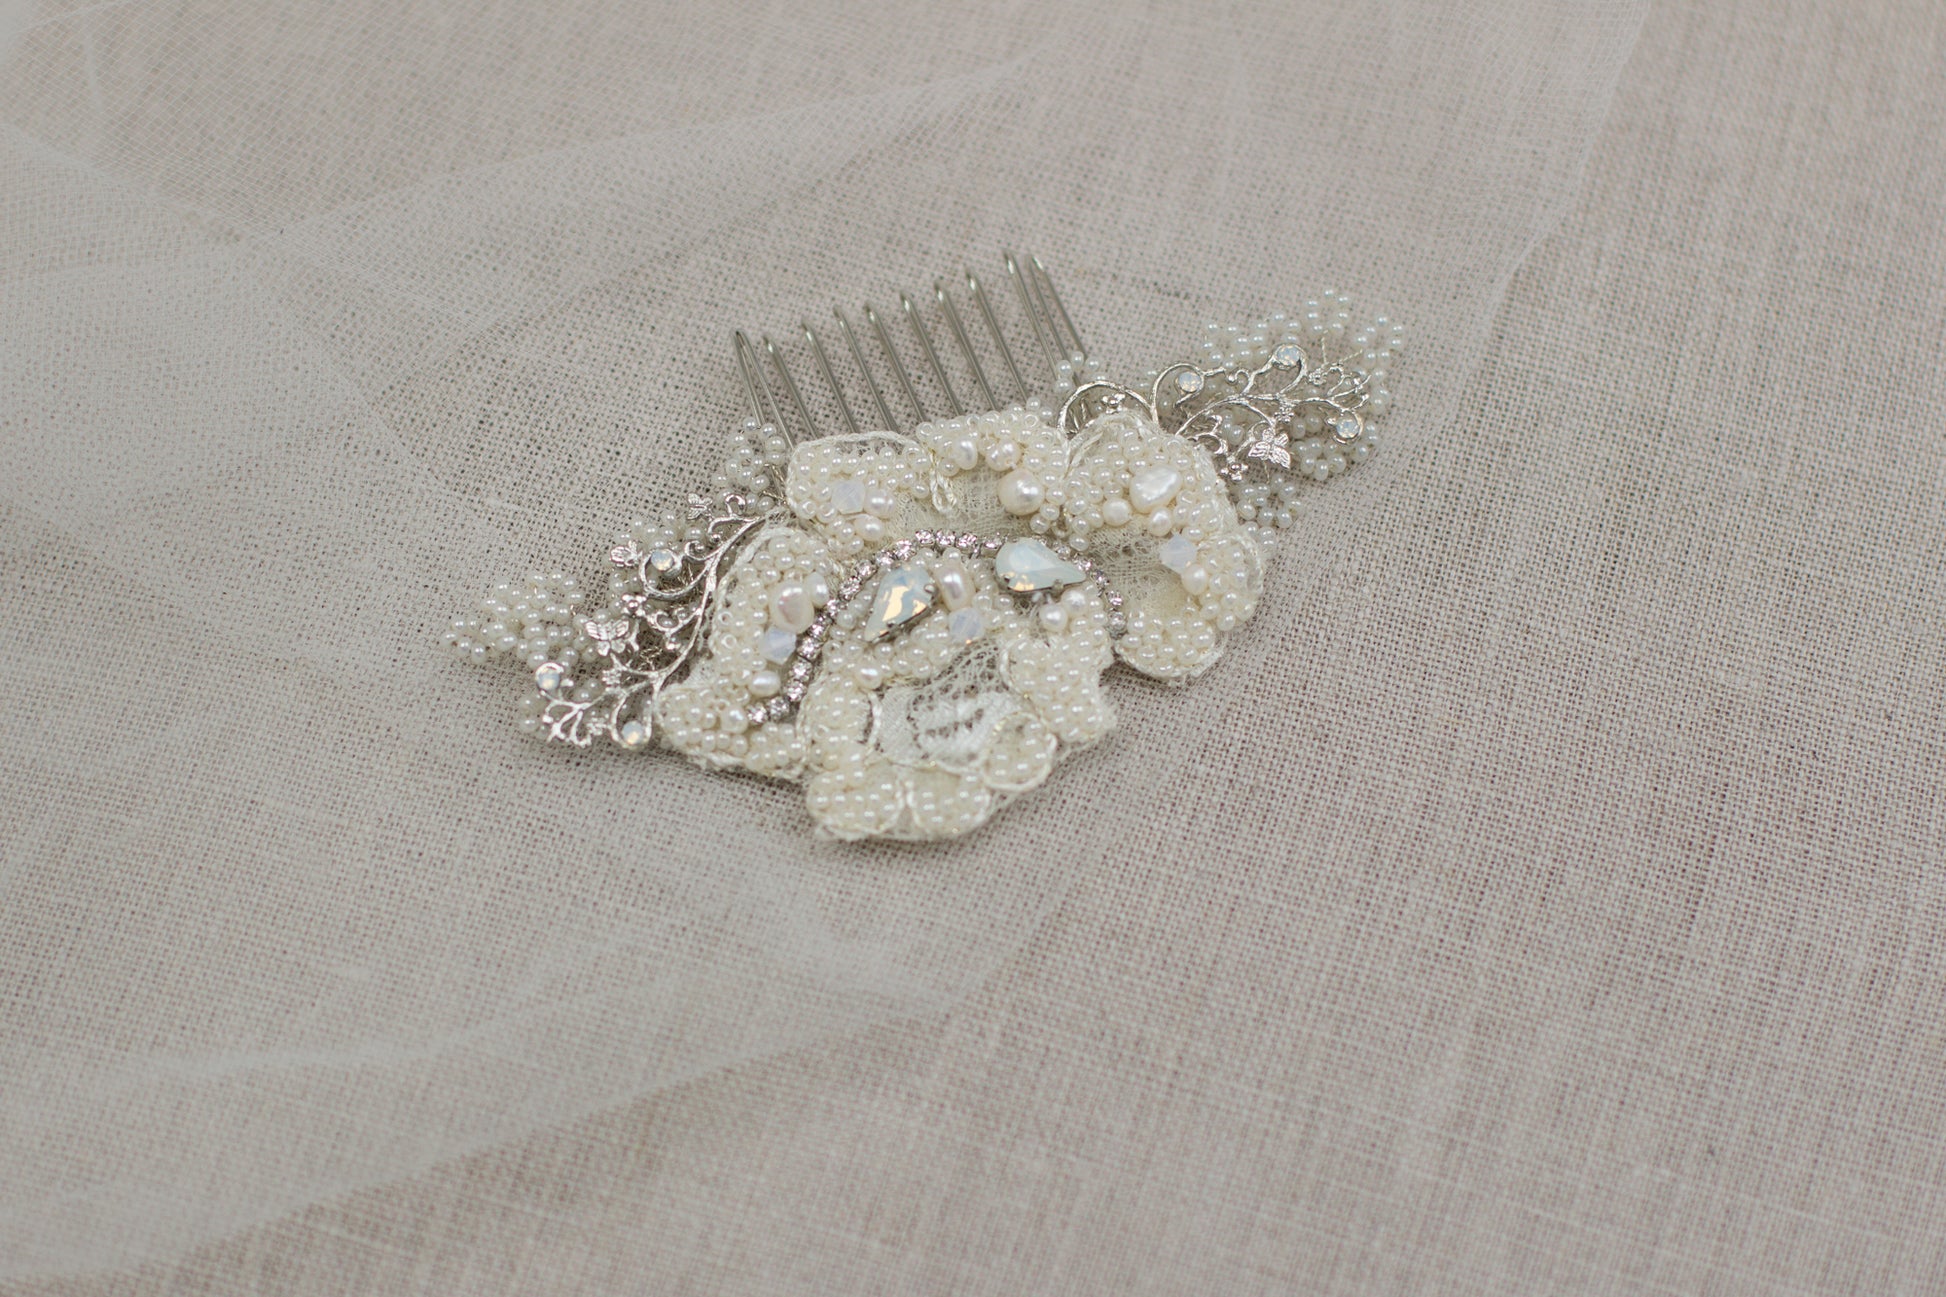 Looking for unique handmade wedding hair accessories? Check out our online bridal boutique in Europe. Stunning lace bridal hair comb made with beautiful pearls and adorned with floral motifs. Lace wedding headpiece, crystal hair comb, hair adornment to complete your bridal look. Shop now and find the perfect wedding hair piece for your special day.